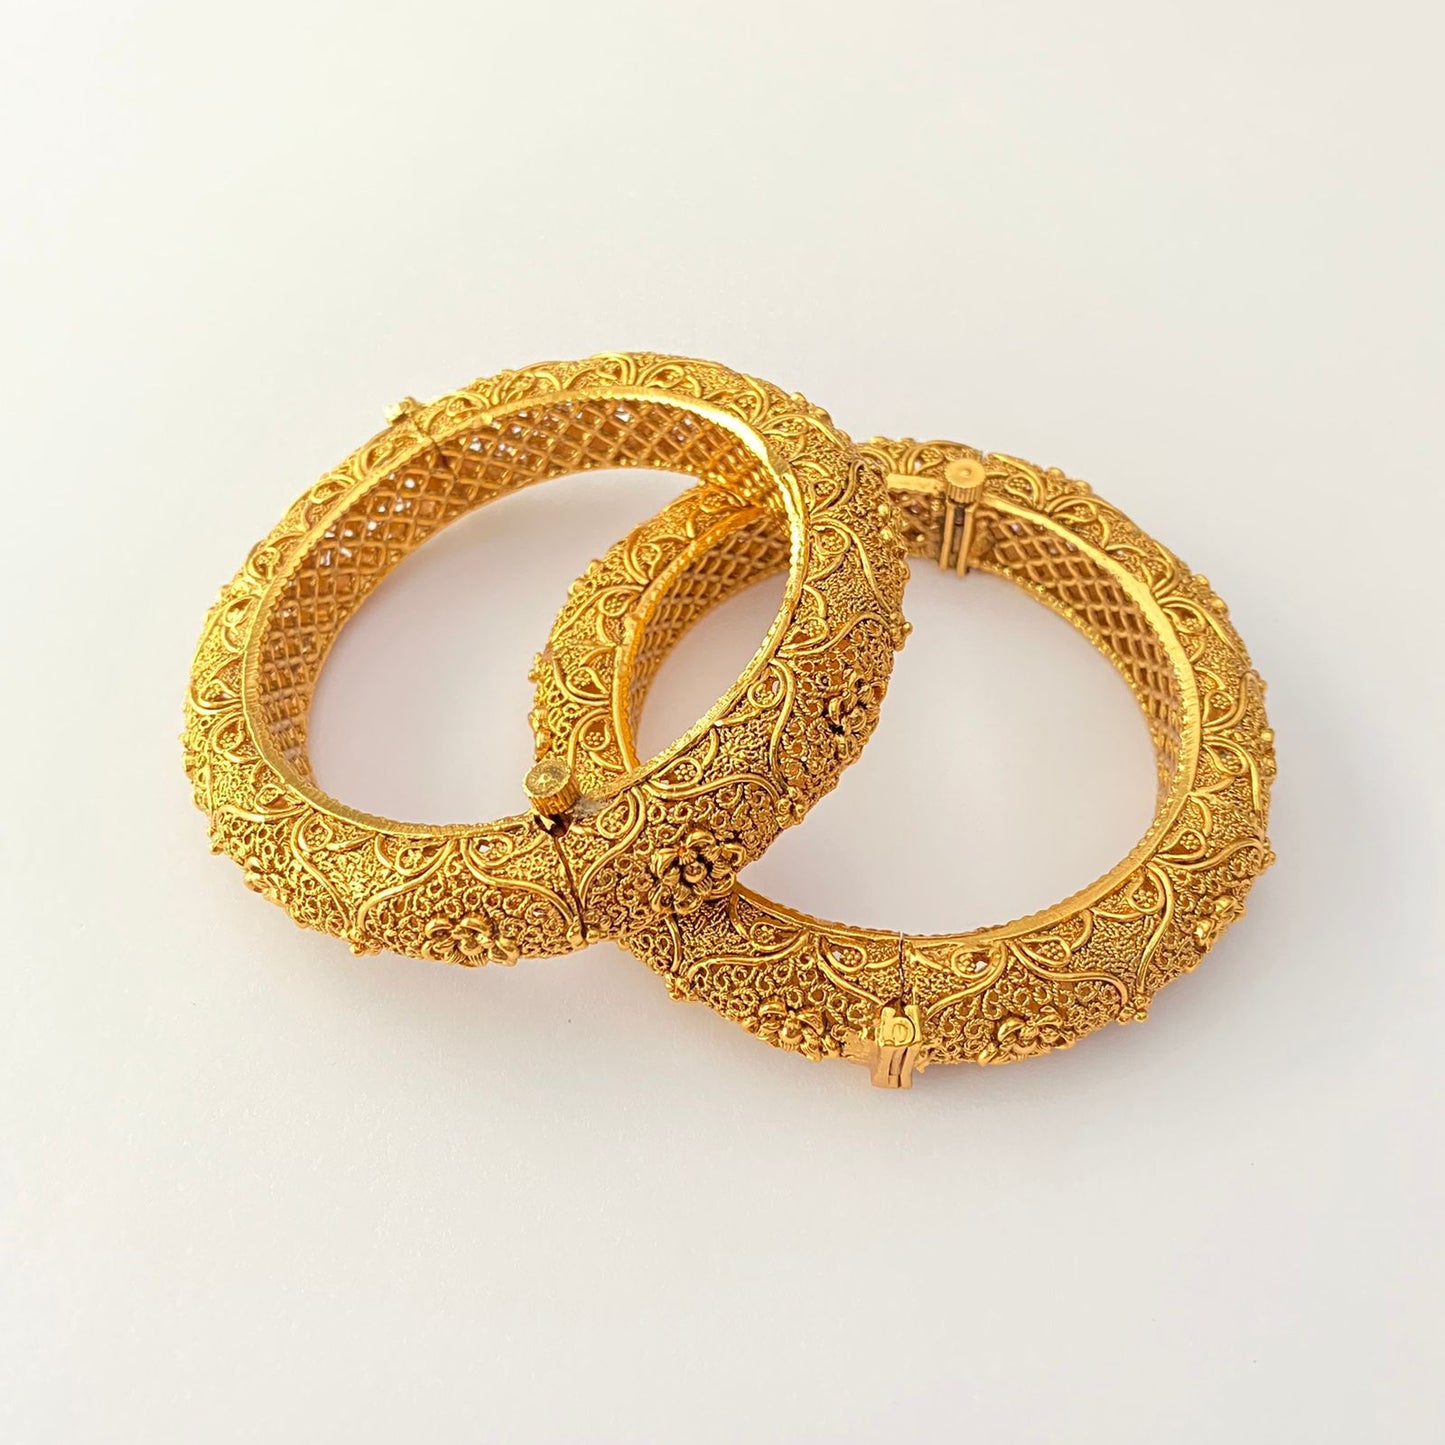 GOLD PLATED TRADITIONAL DESIGN WOMEN BANGLE